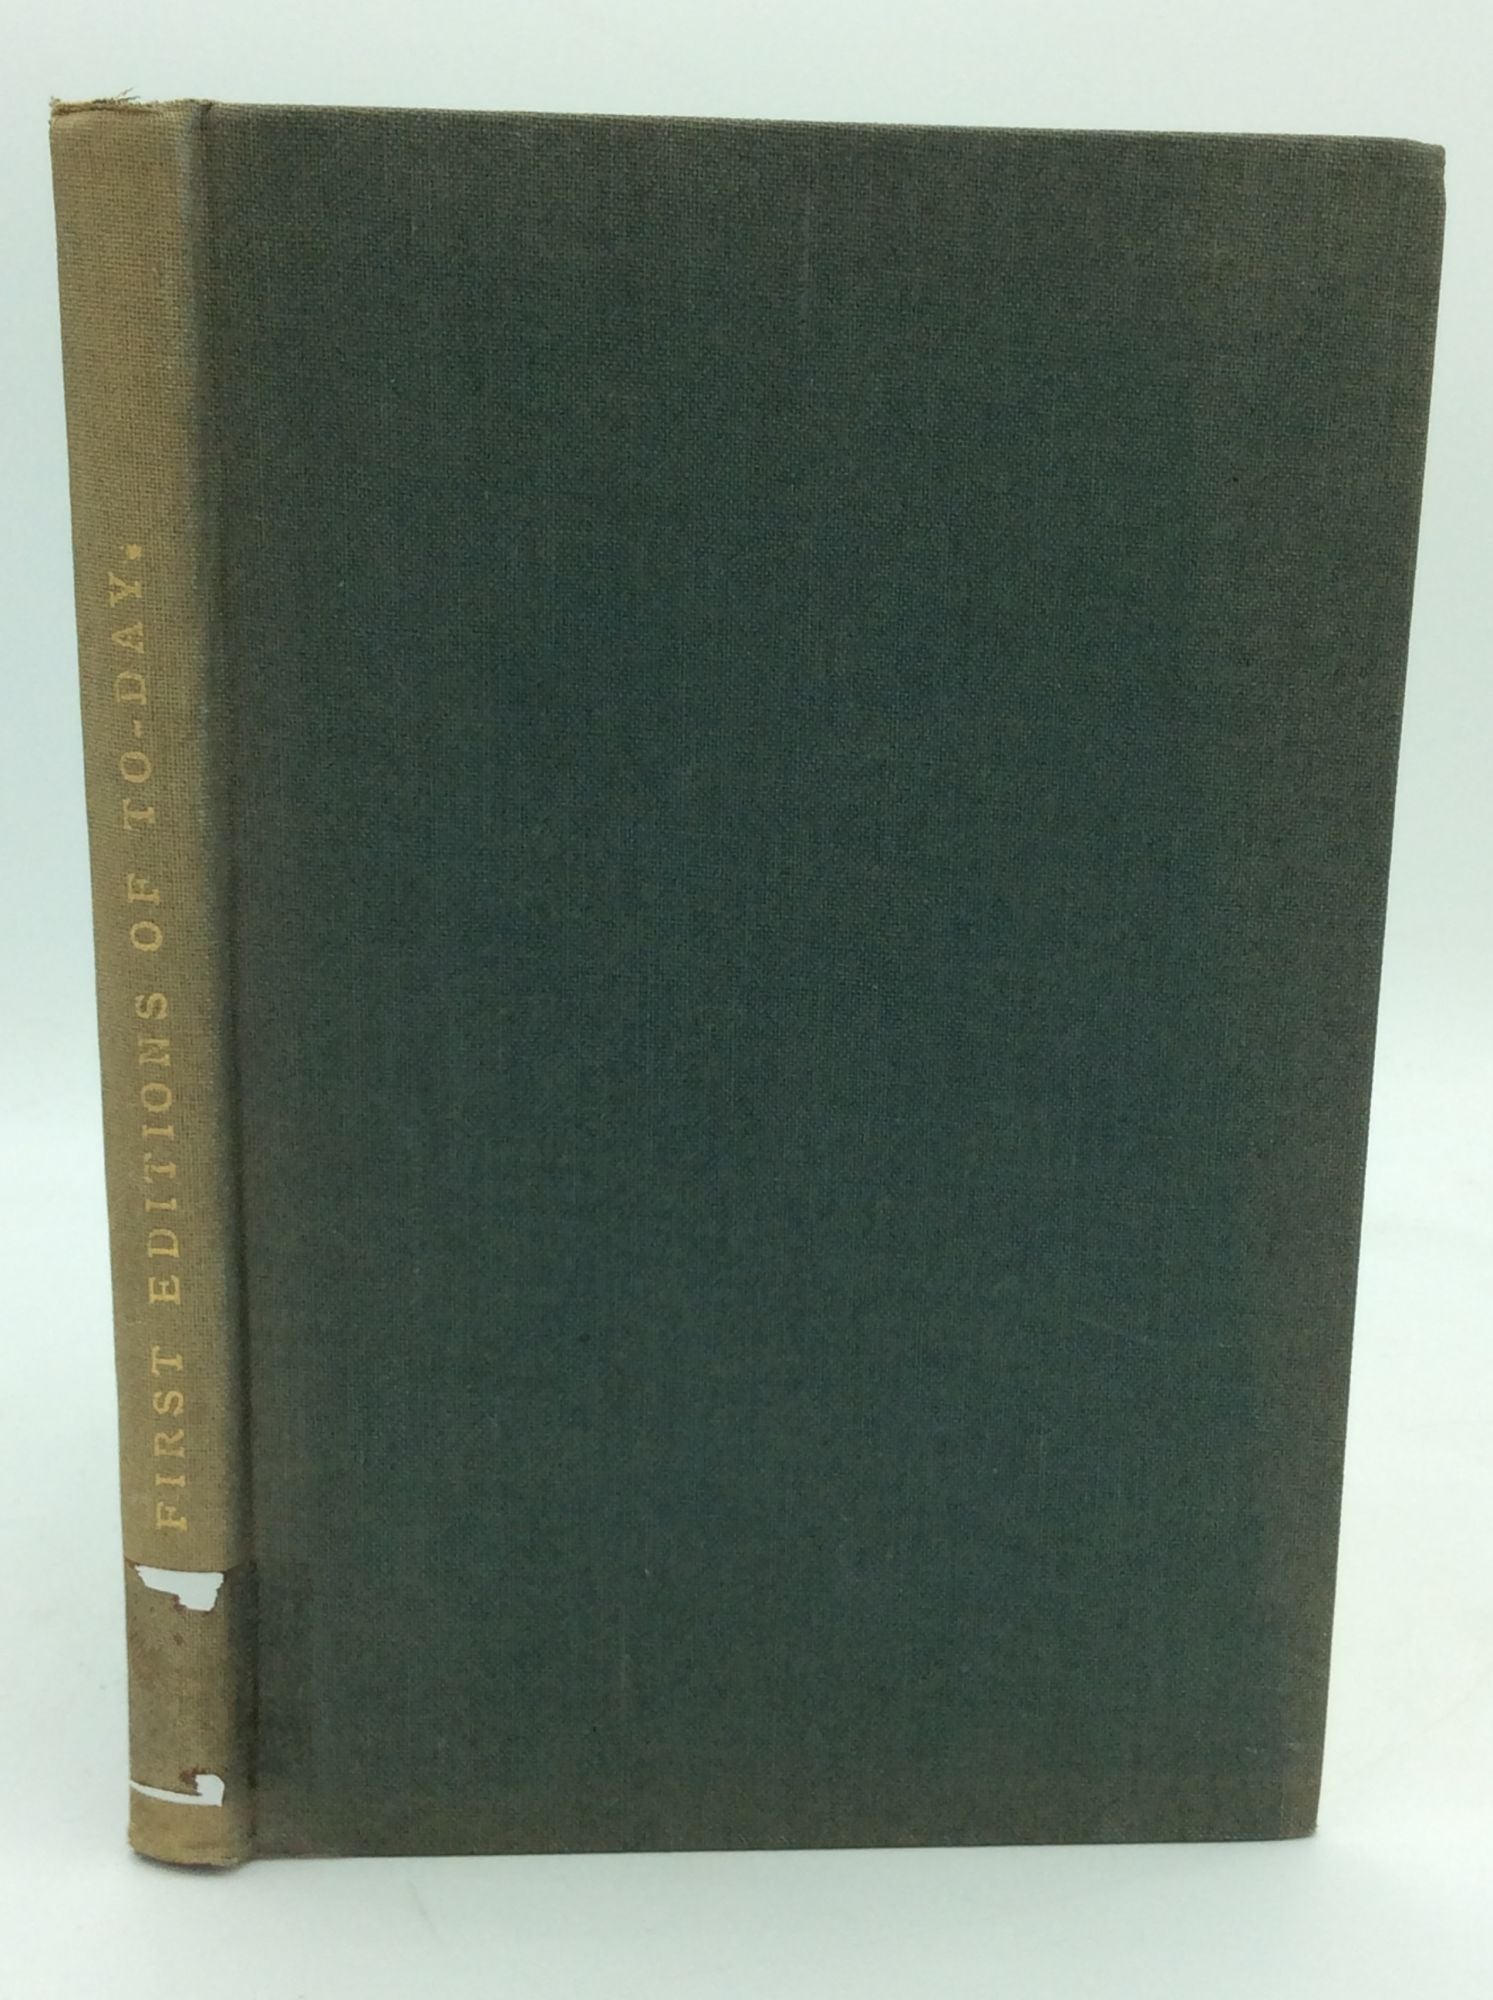 H.S. Boutell - First Editions of Today and How to Tell Them